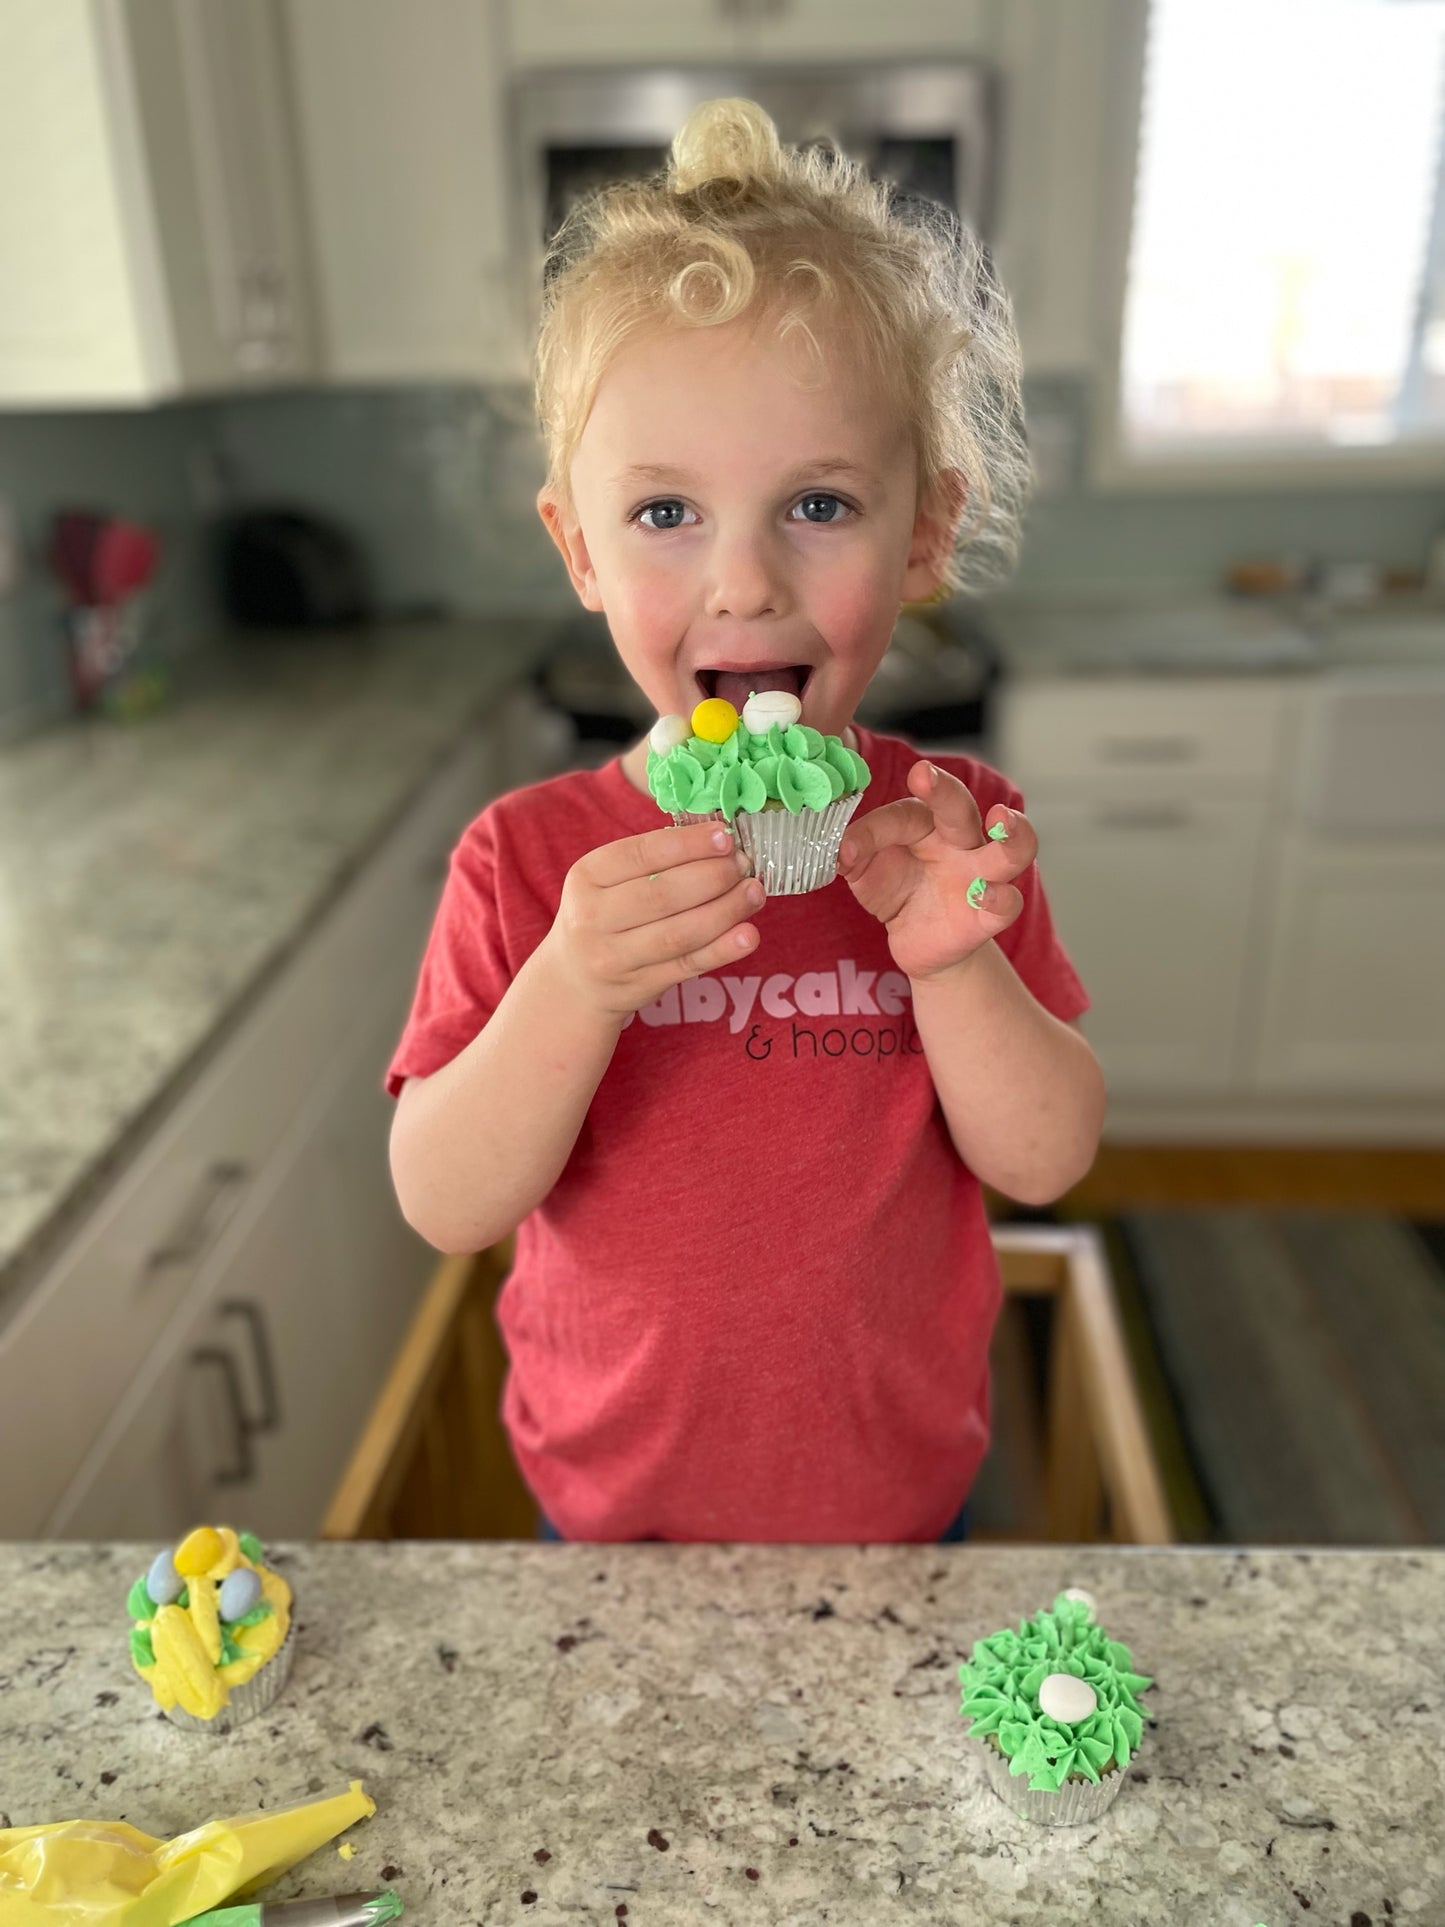 A little boy is about to enjoy the fruits of his labor after finishing a DIY cupcake kit at home. He smiles as he opens his mouth to eat a cupcake. Two other decorated cupcakes and piping bags lay on the counter in front of him. He is wearing the babycakes and hoopla shirt, which fits him well.